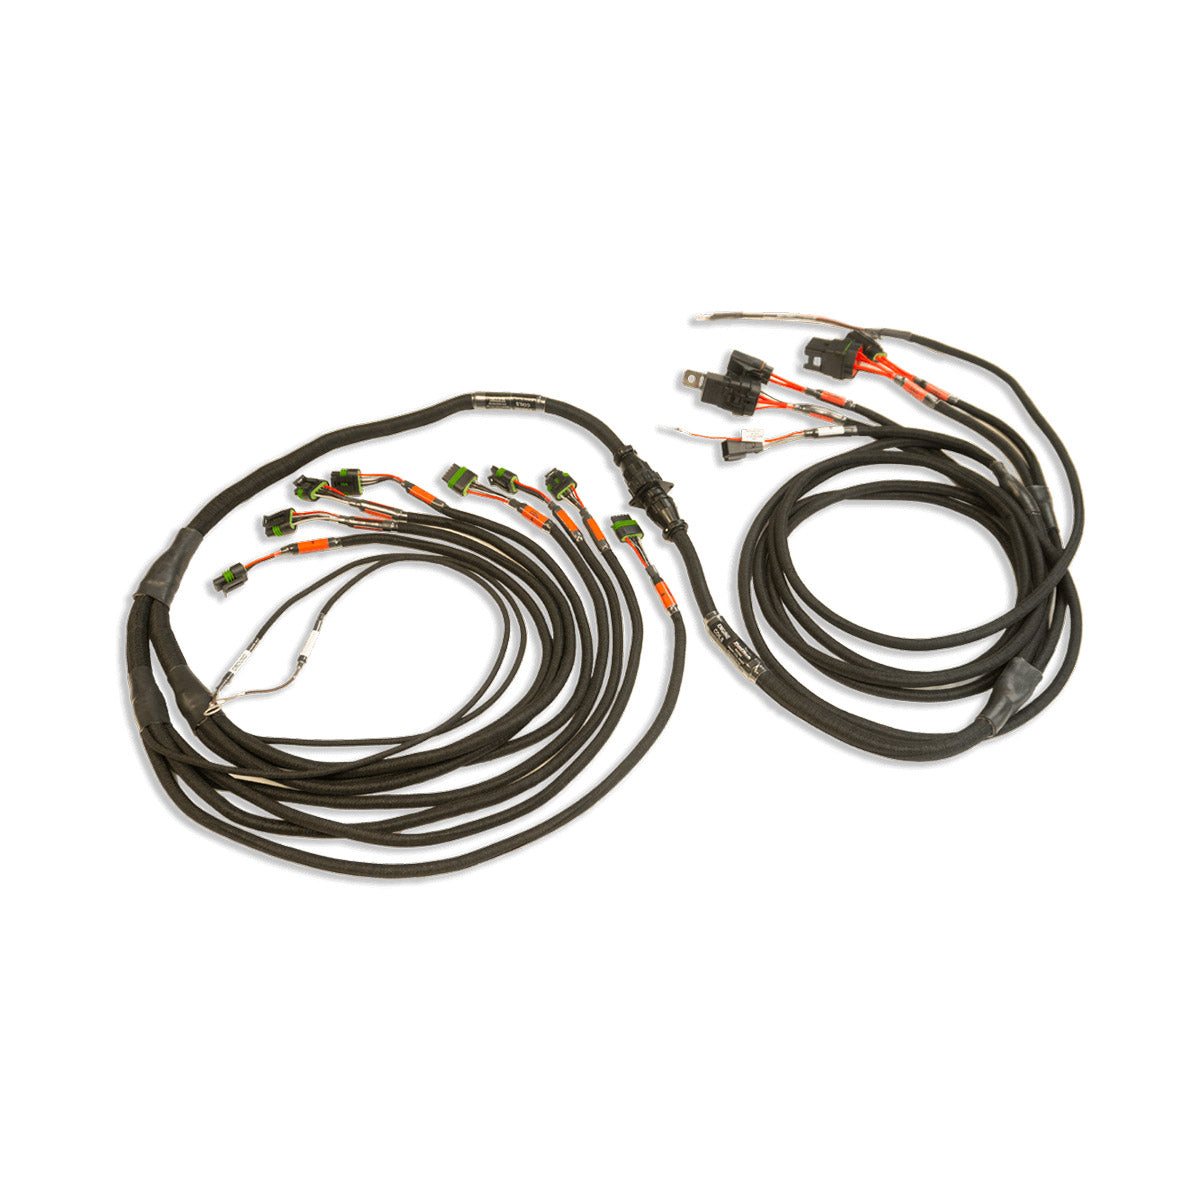 FUELTECH PRO600 SMART COIL HARNESS, HIGH OUTPUT, 5-WIRE